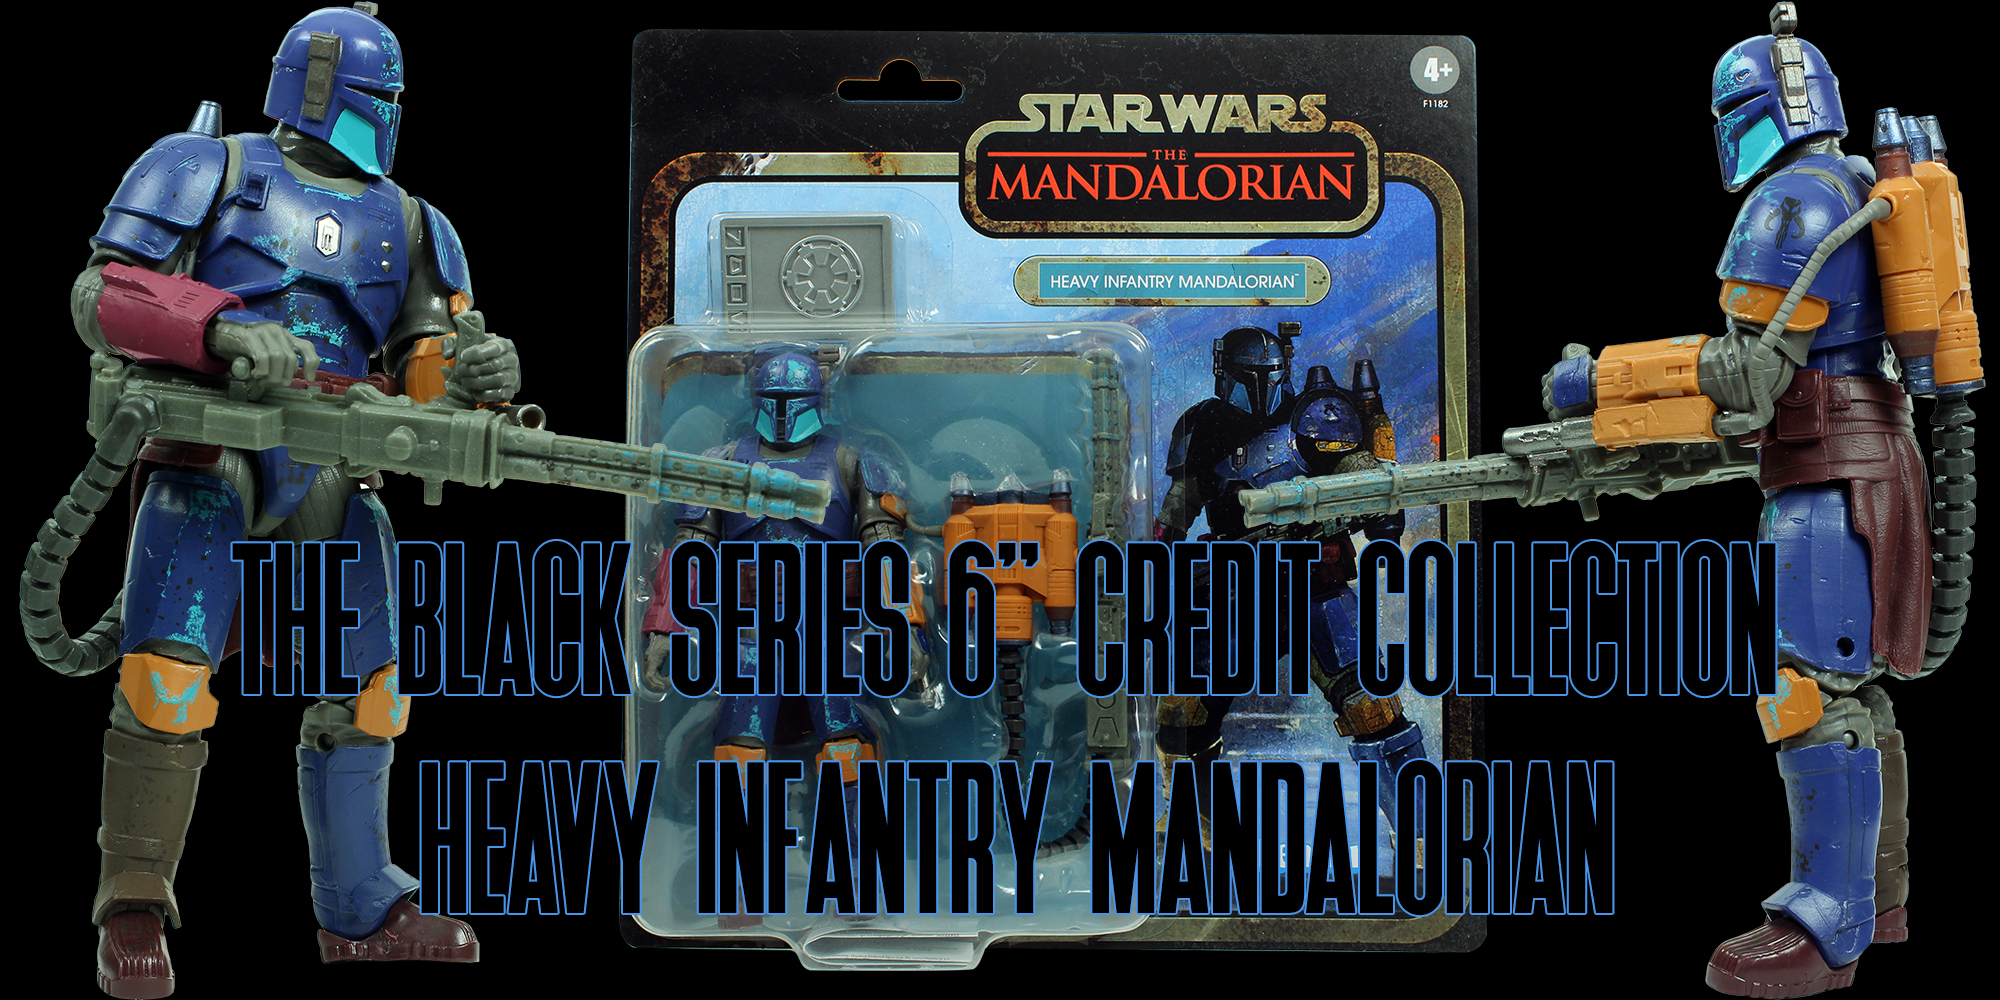 Black Series Heavy Infantry Mandalorian Credit Collection